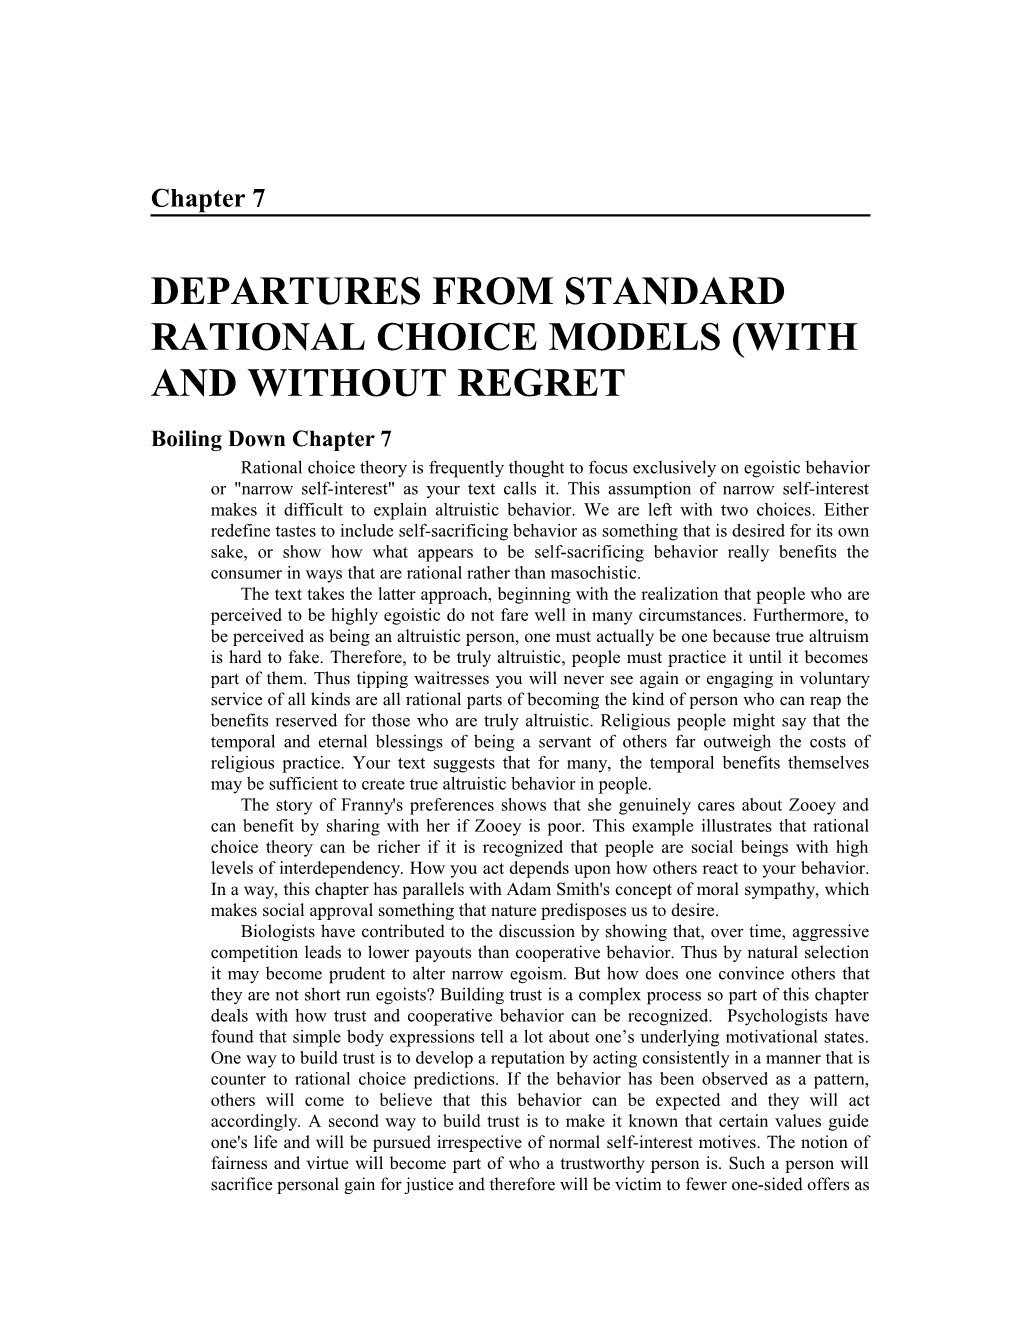 Departures from Standard Rational Choice Models (With and Without Regret